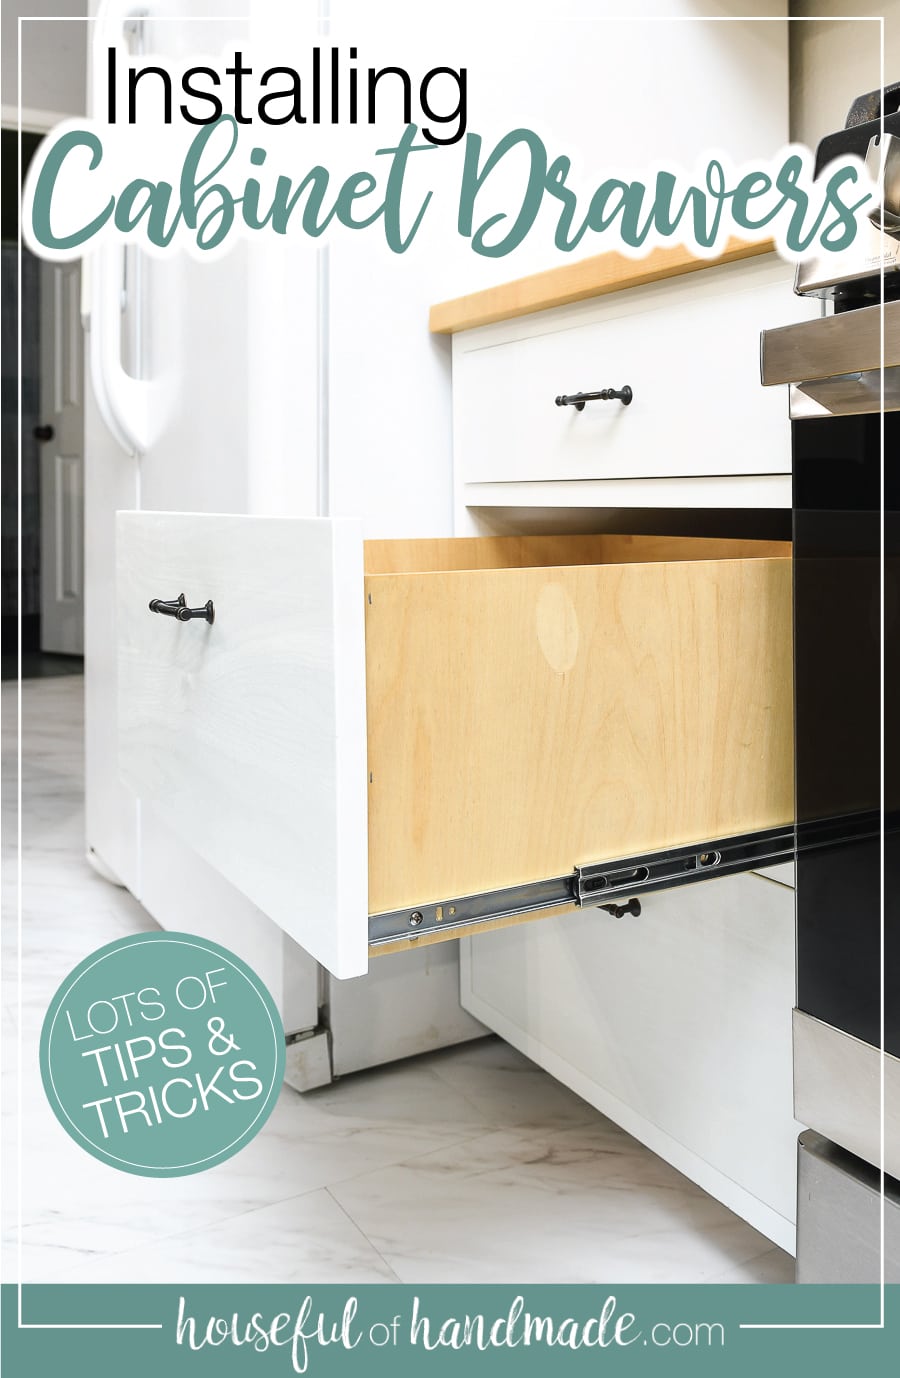 How To Install Cabinet Drawers With, How To Make Cabinet Drawers With Slides